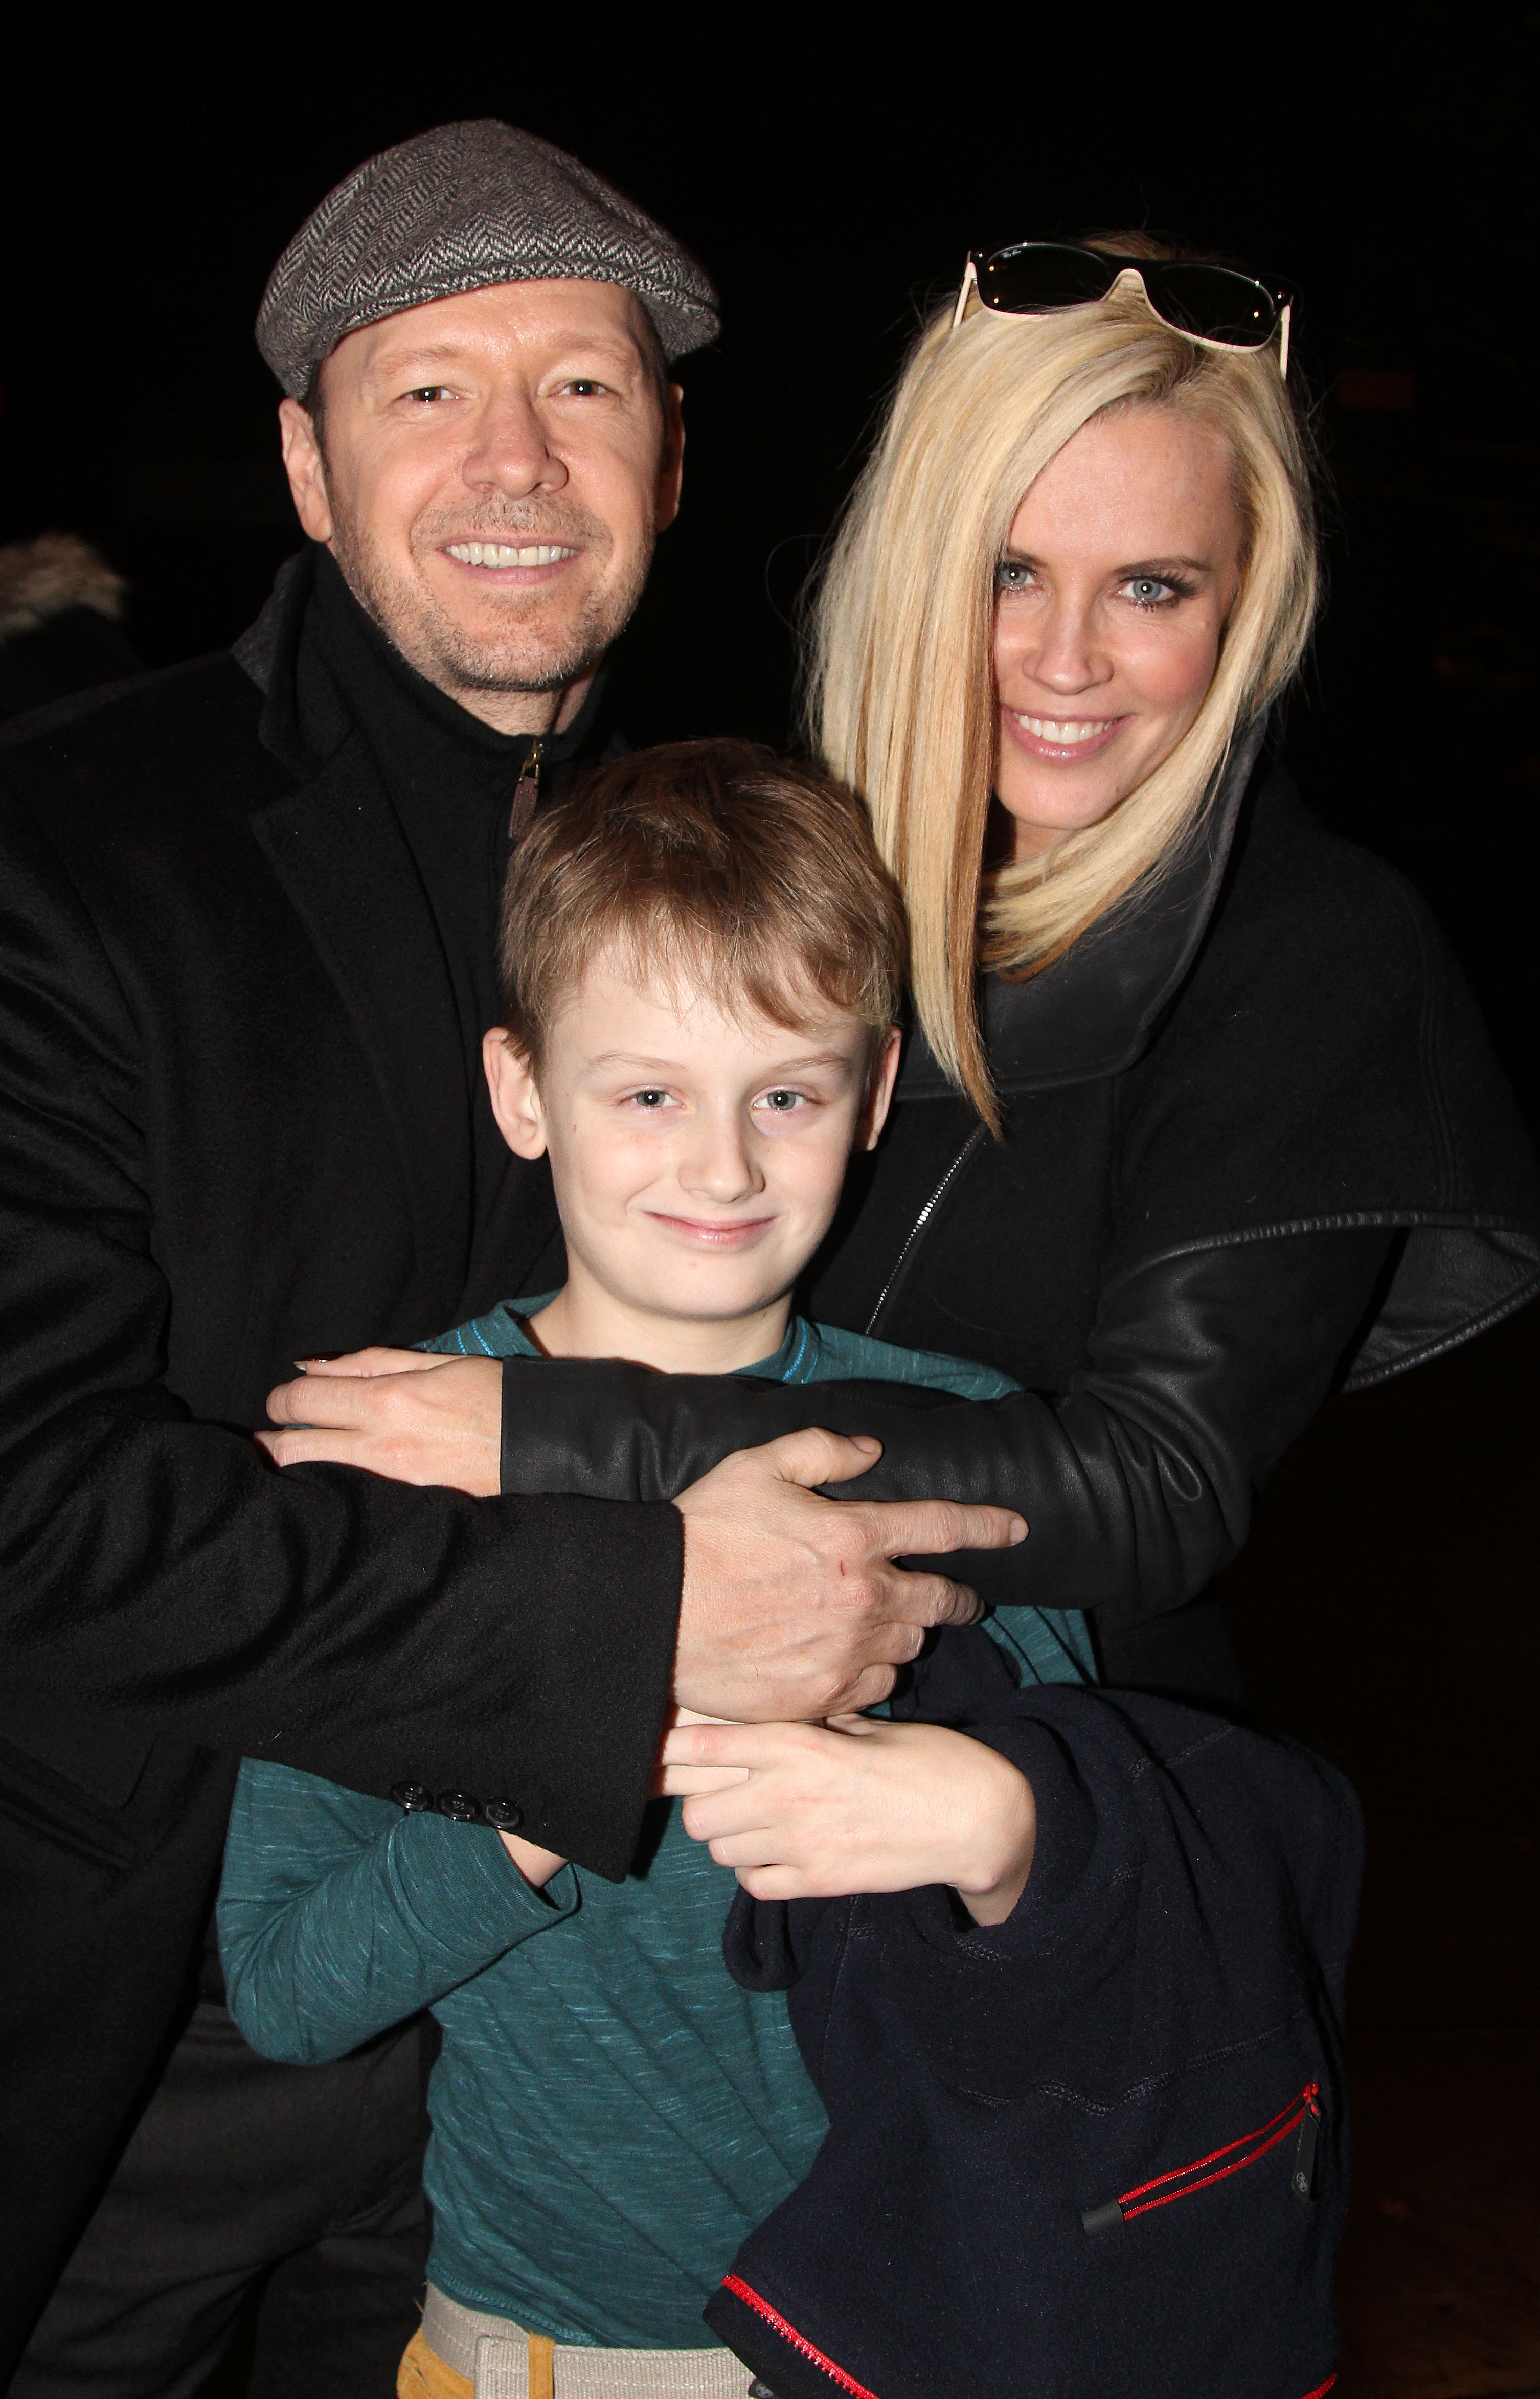 Donnie Wahlberg, Evan Asher, and Jenny McCarthy backstage at the broadway musical "Cinderella" in New York City, 2014 | Source: Getty Images